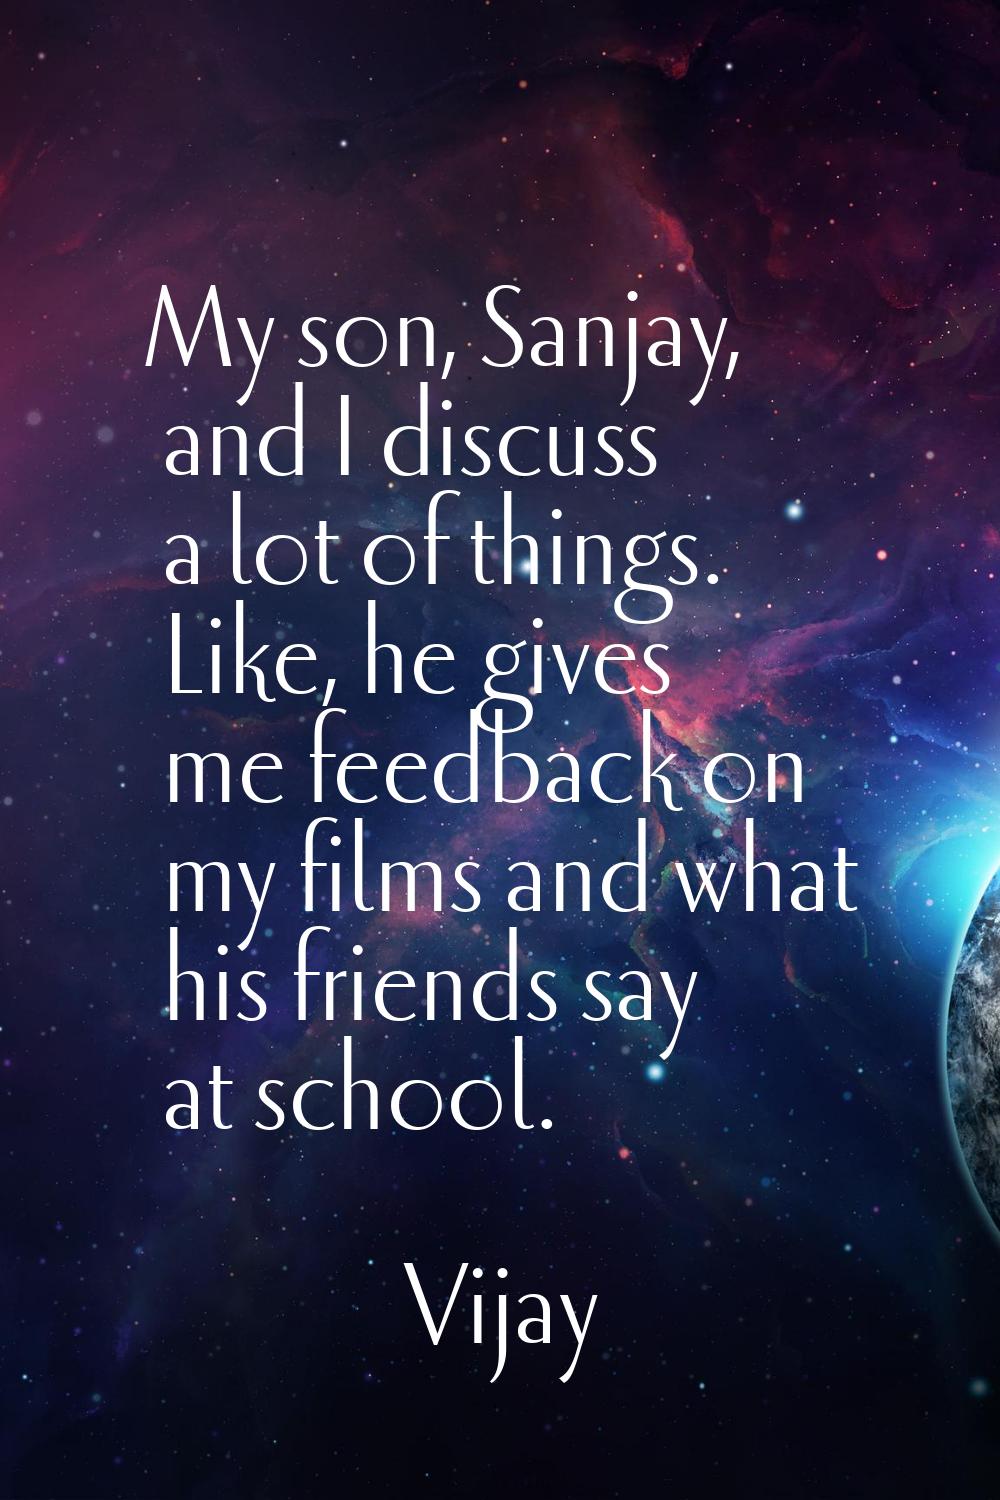 My son, Sanjay, and I discuss a lot of things. Like, he gives me feedback on my films and what his 